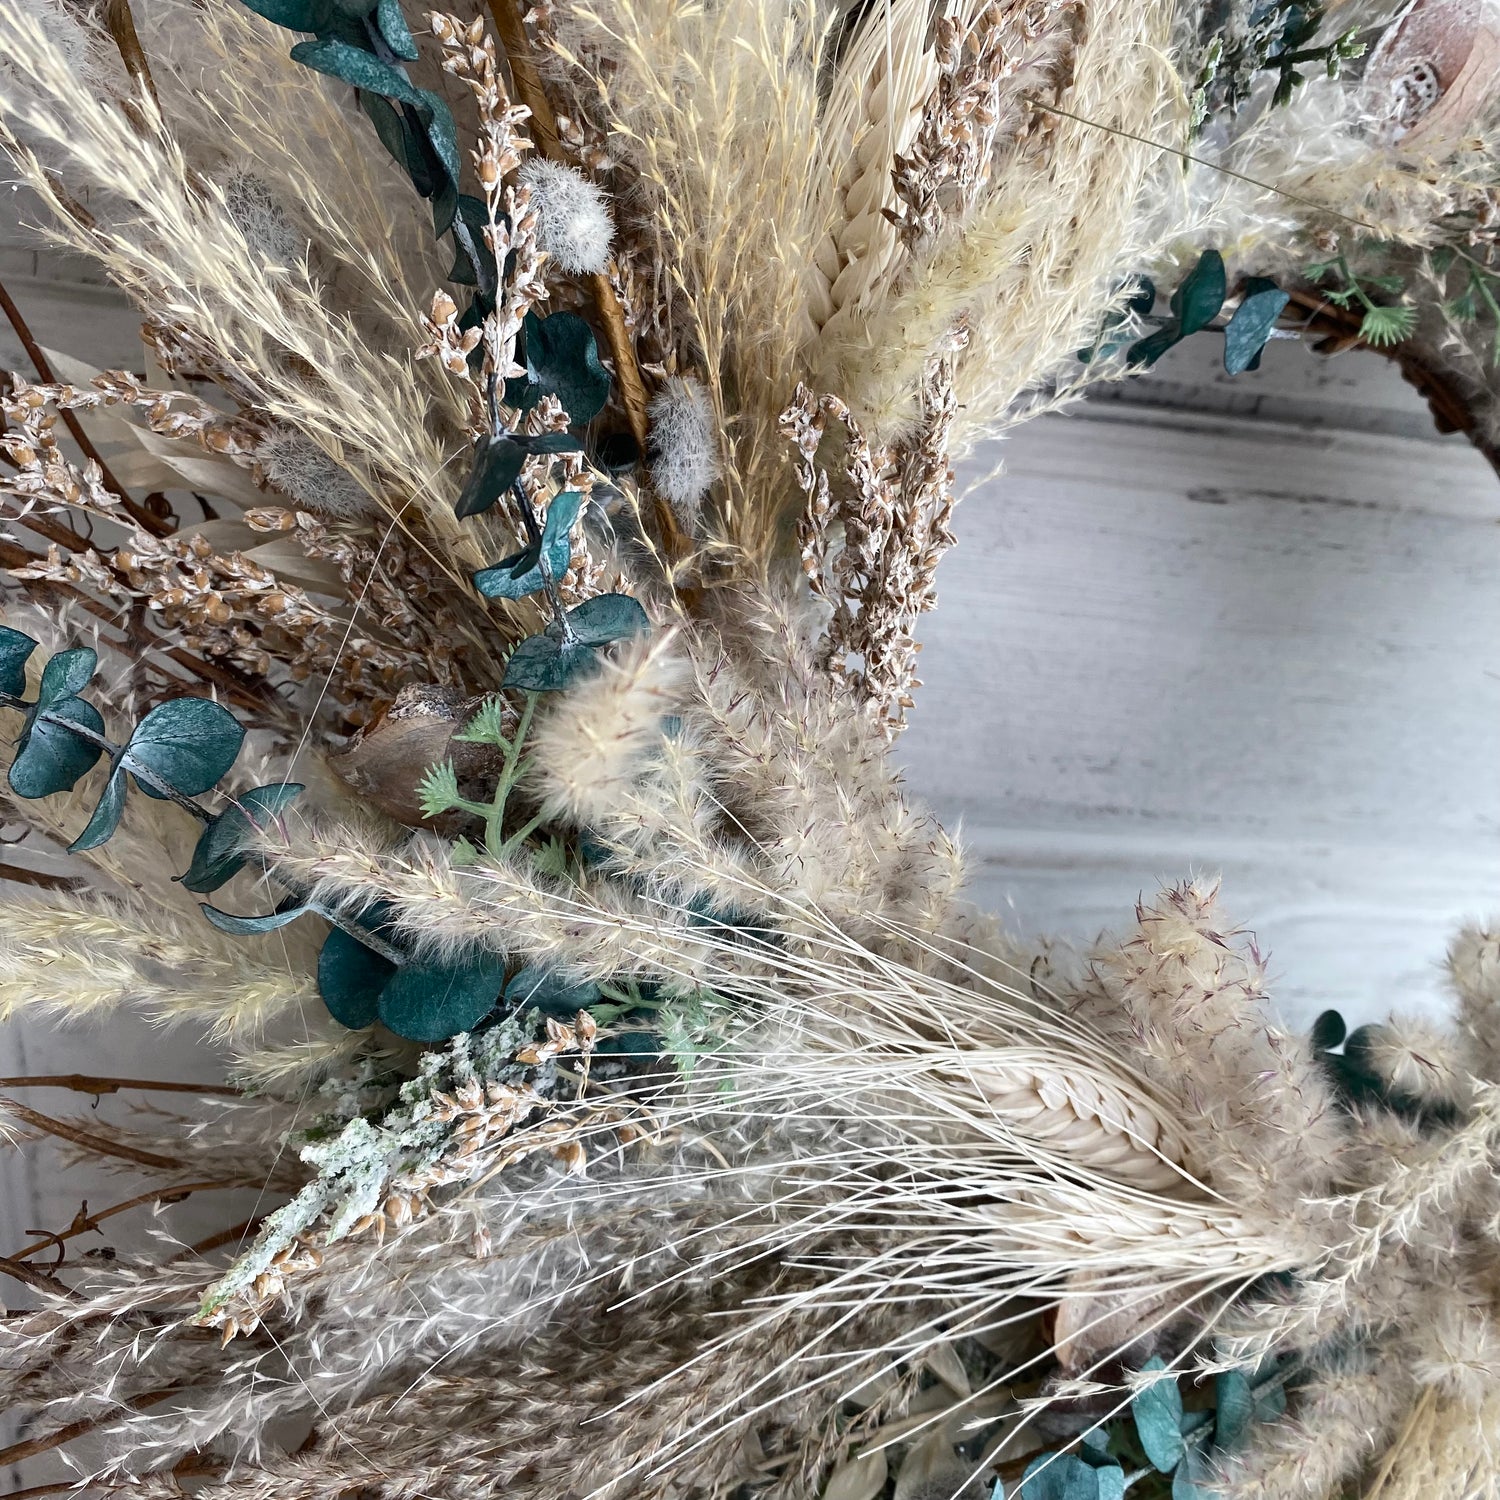 a wreath with creme and neutral cotton stems, pampas grass, eucalyptus, and other dried grasses.